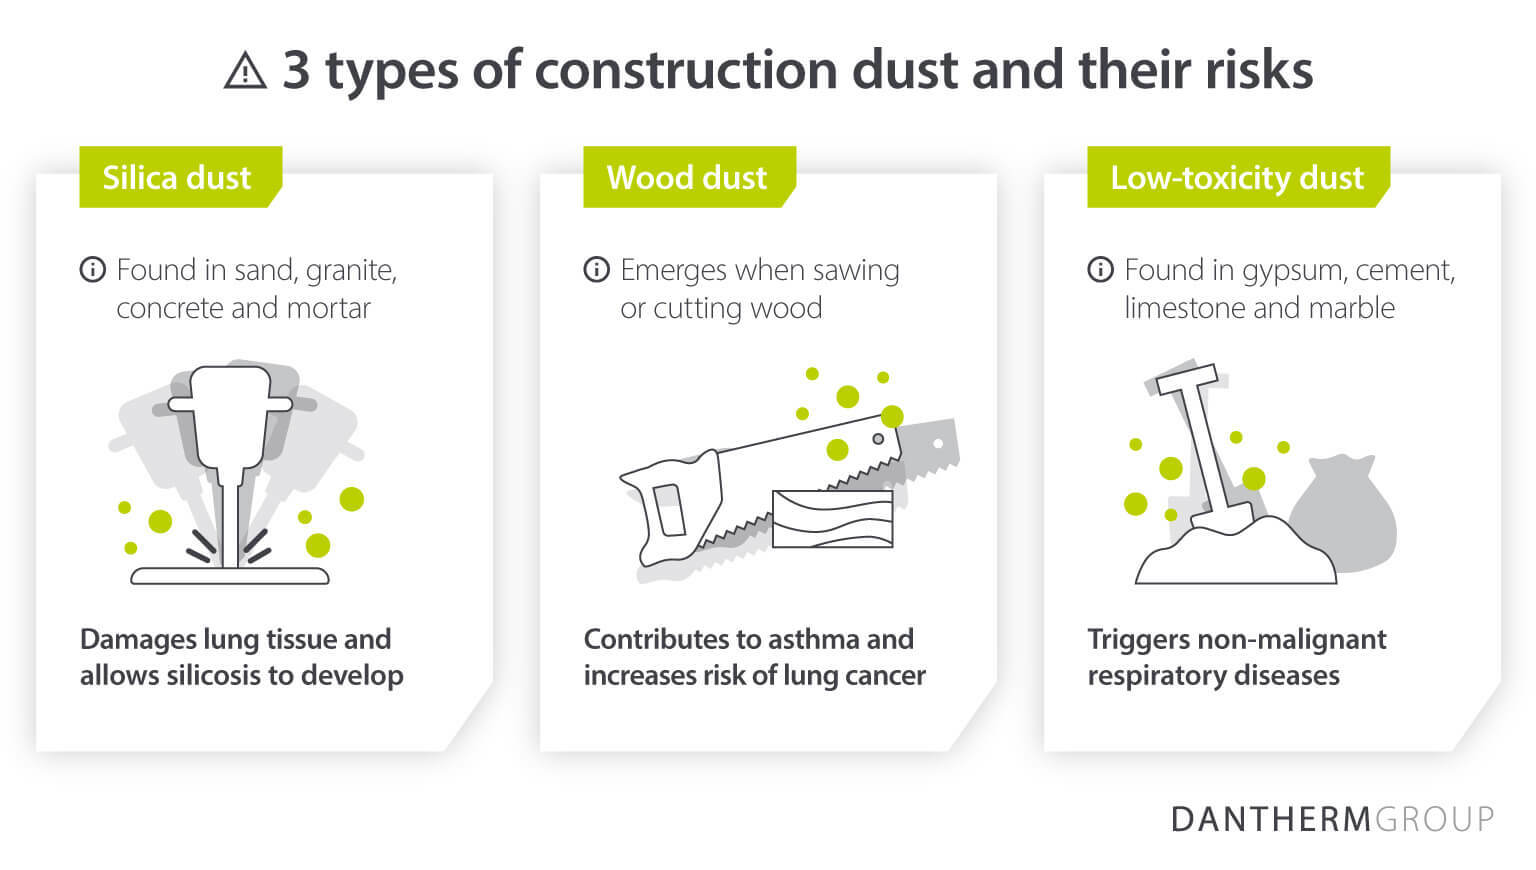 3 types of construction dust and their risks - Image infographic